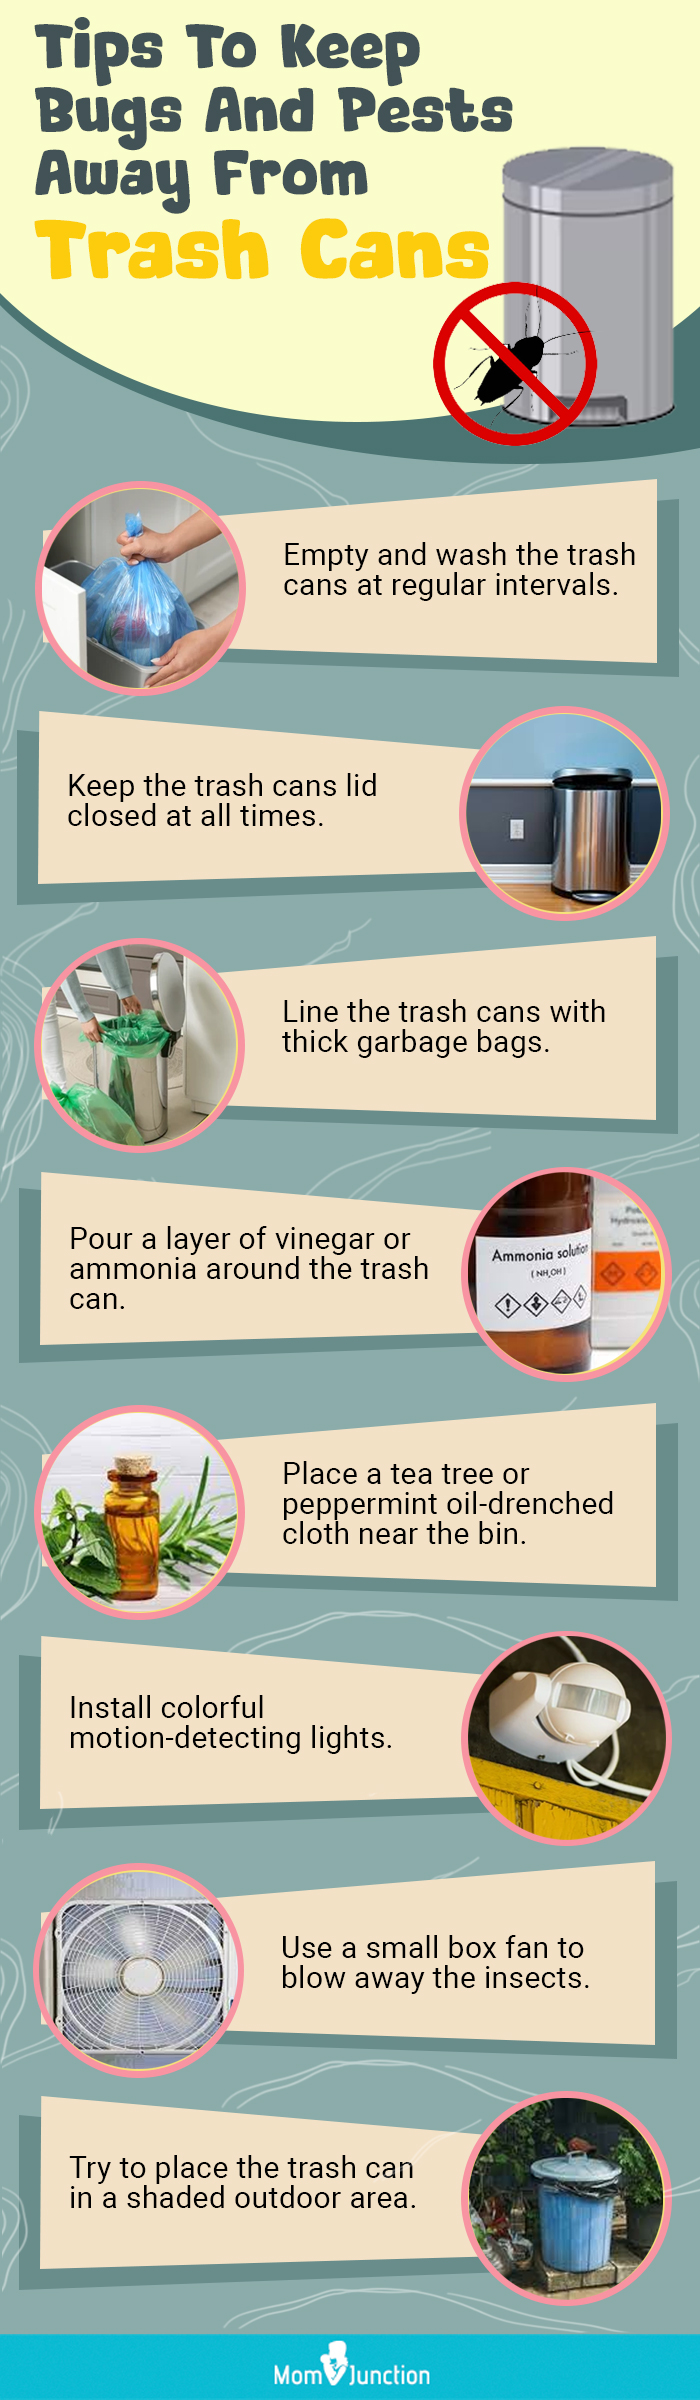 Tips To Keep Bugs And Pests Away From Trash Cans (infographic)